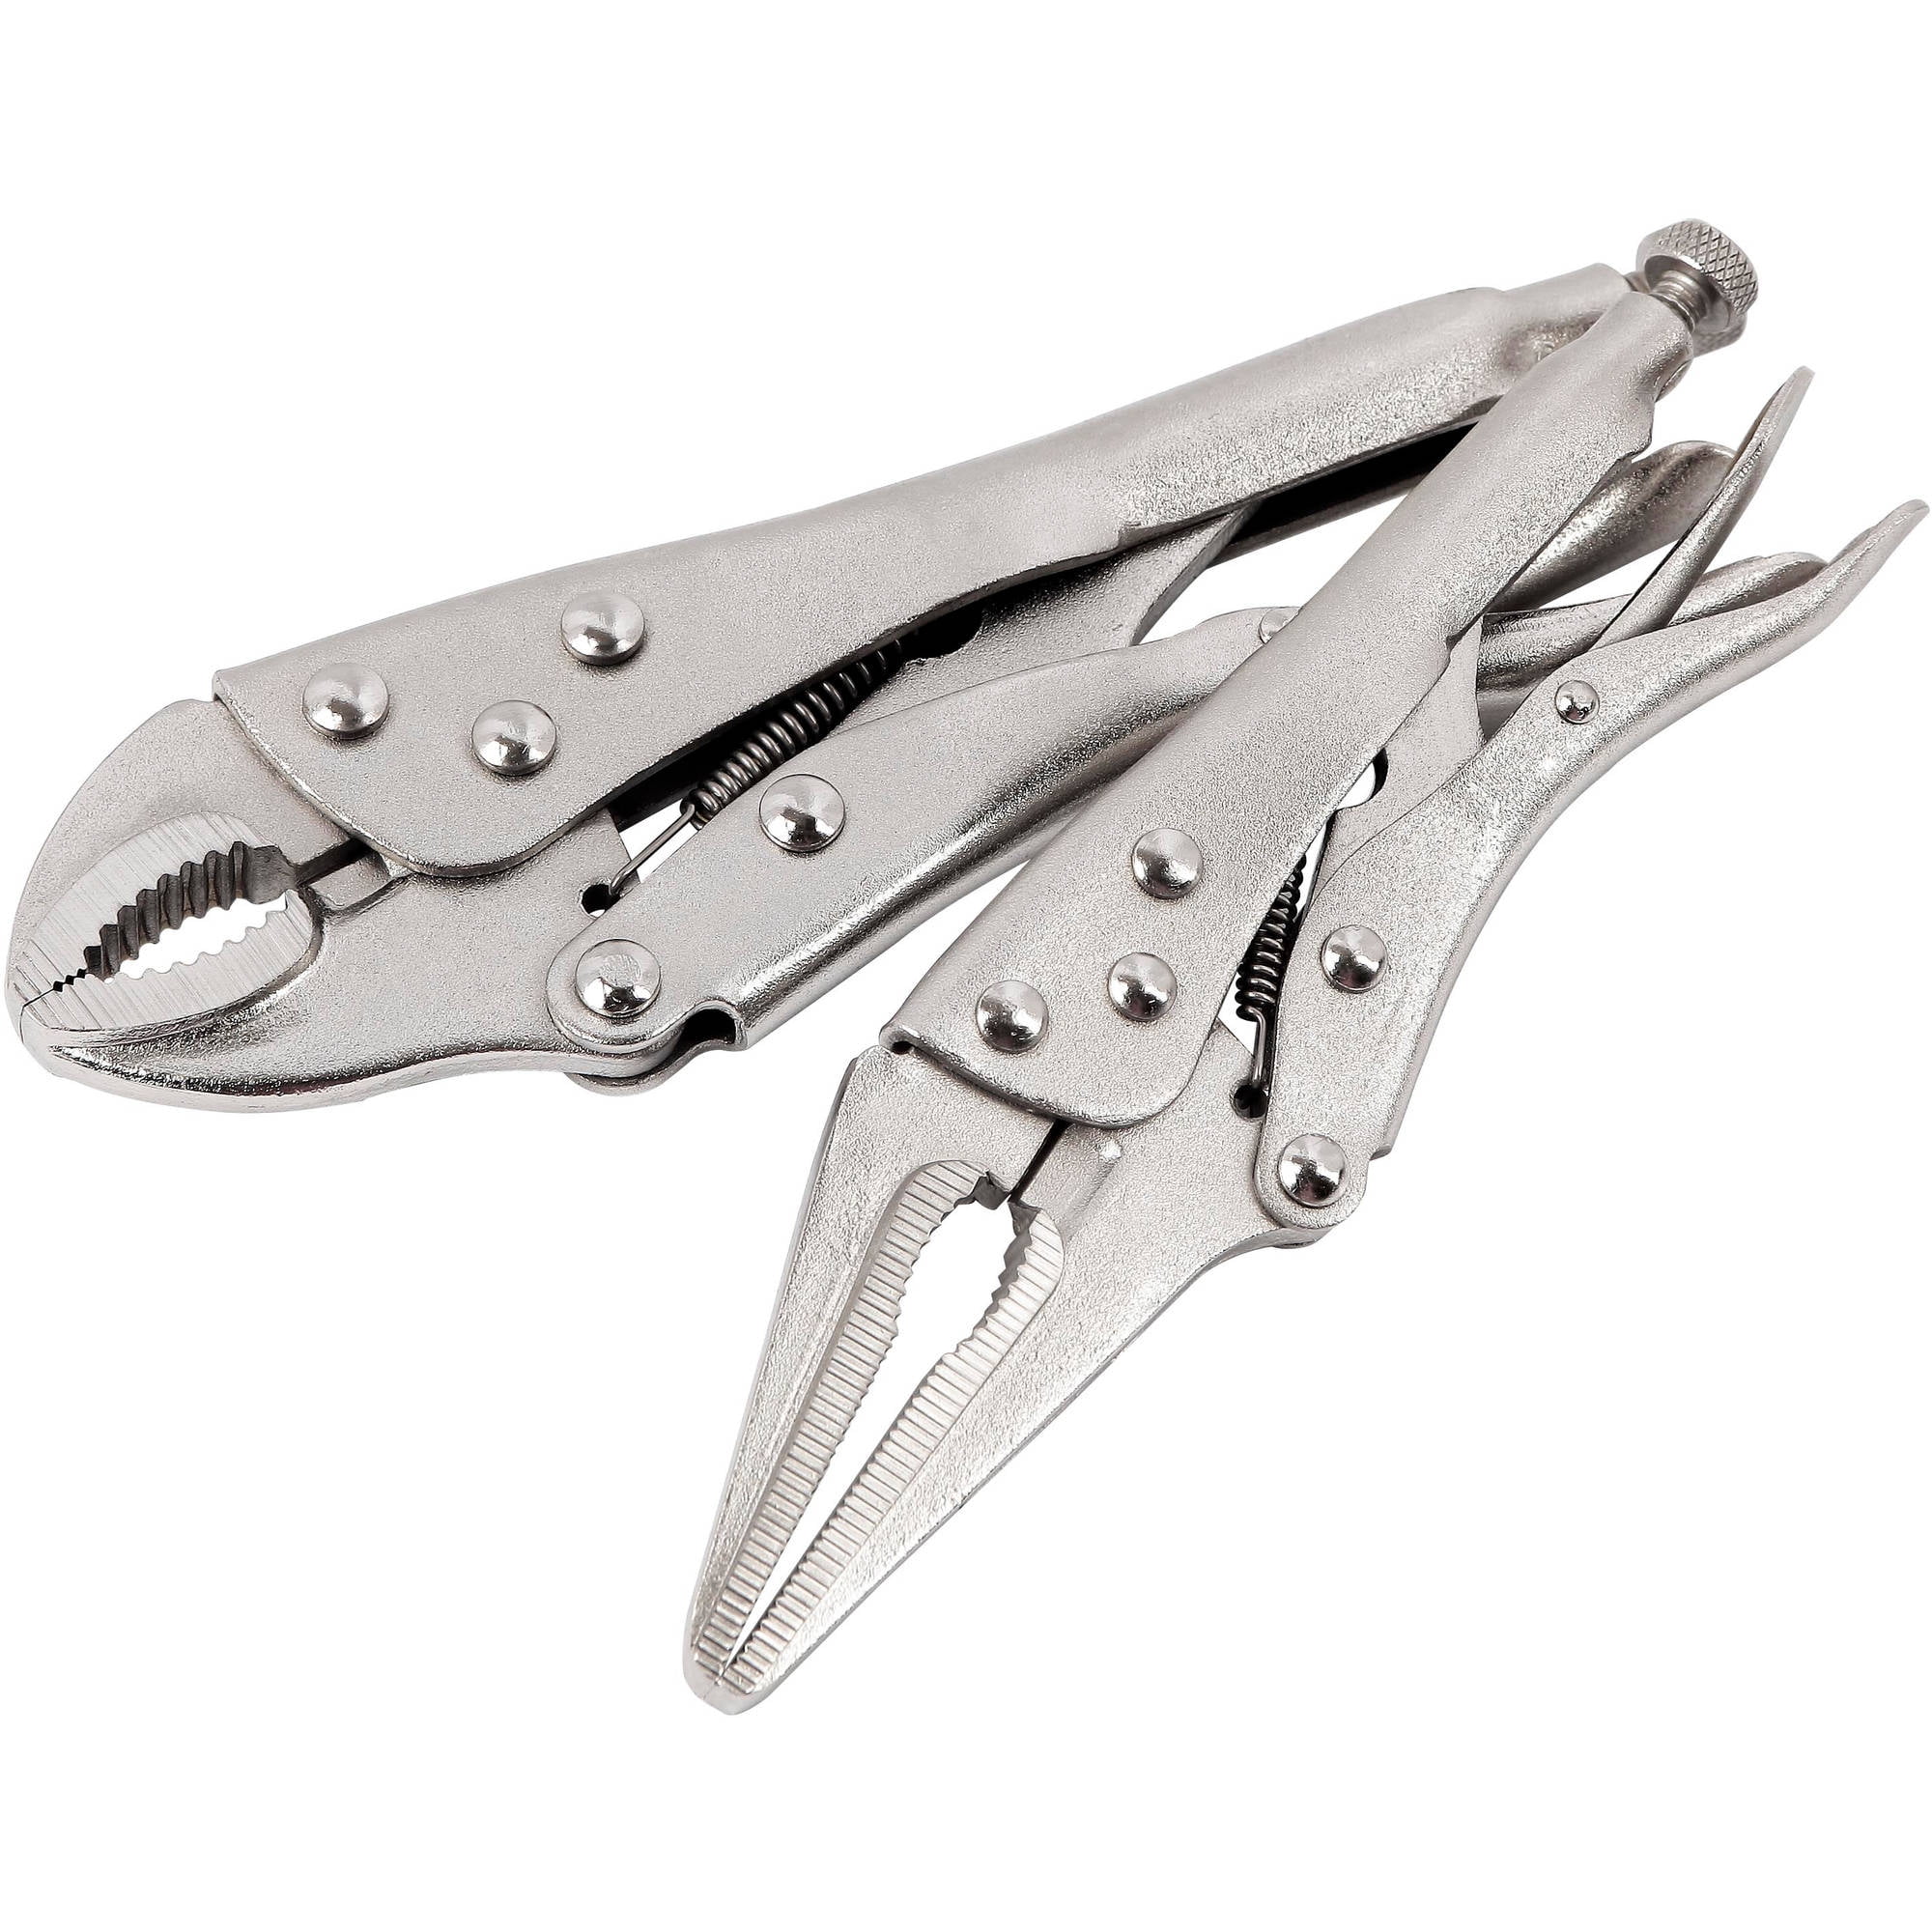 IRWIN VISE-GRIP Original Locking Pliers with Wire Cutter, Curved Jaw,  7-Inch (702L3)